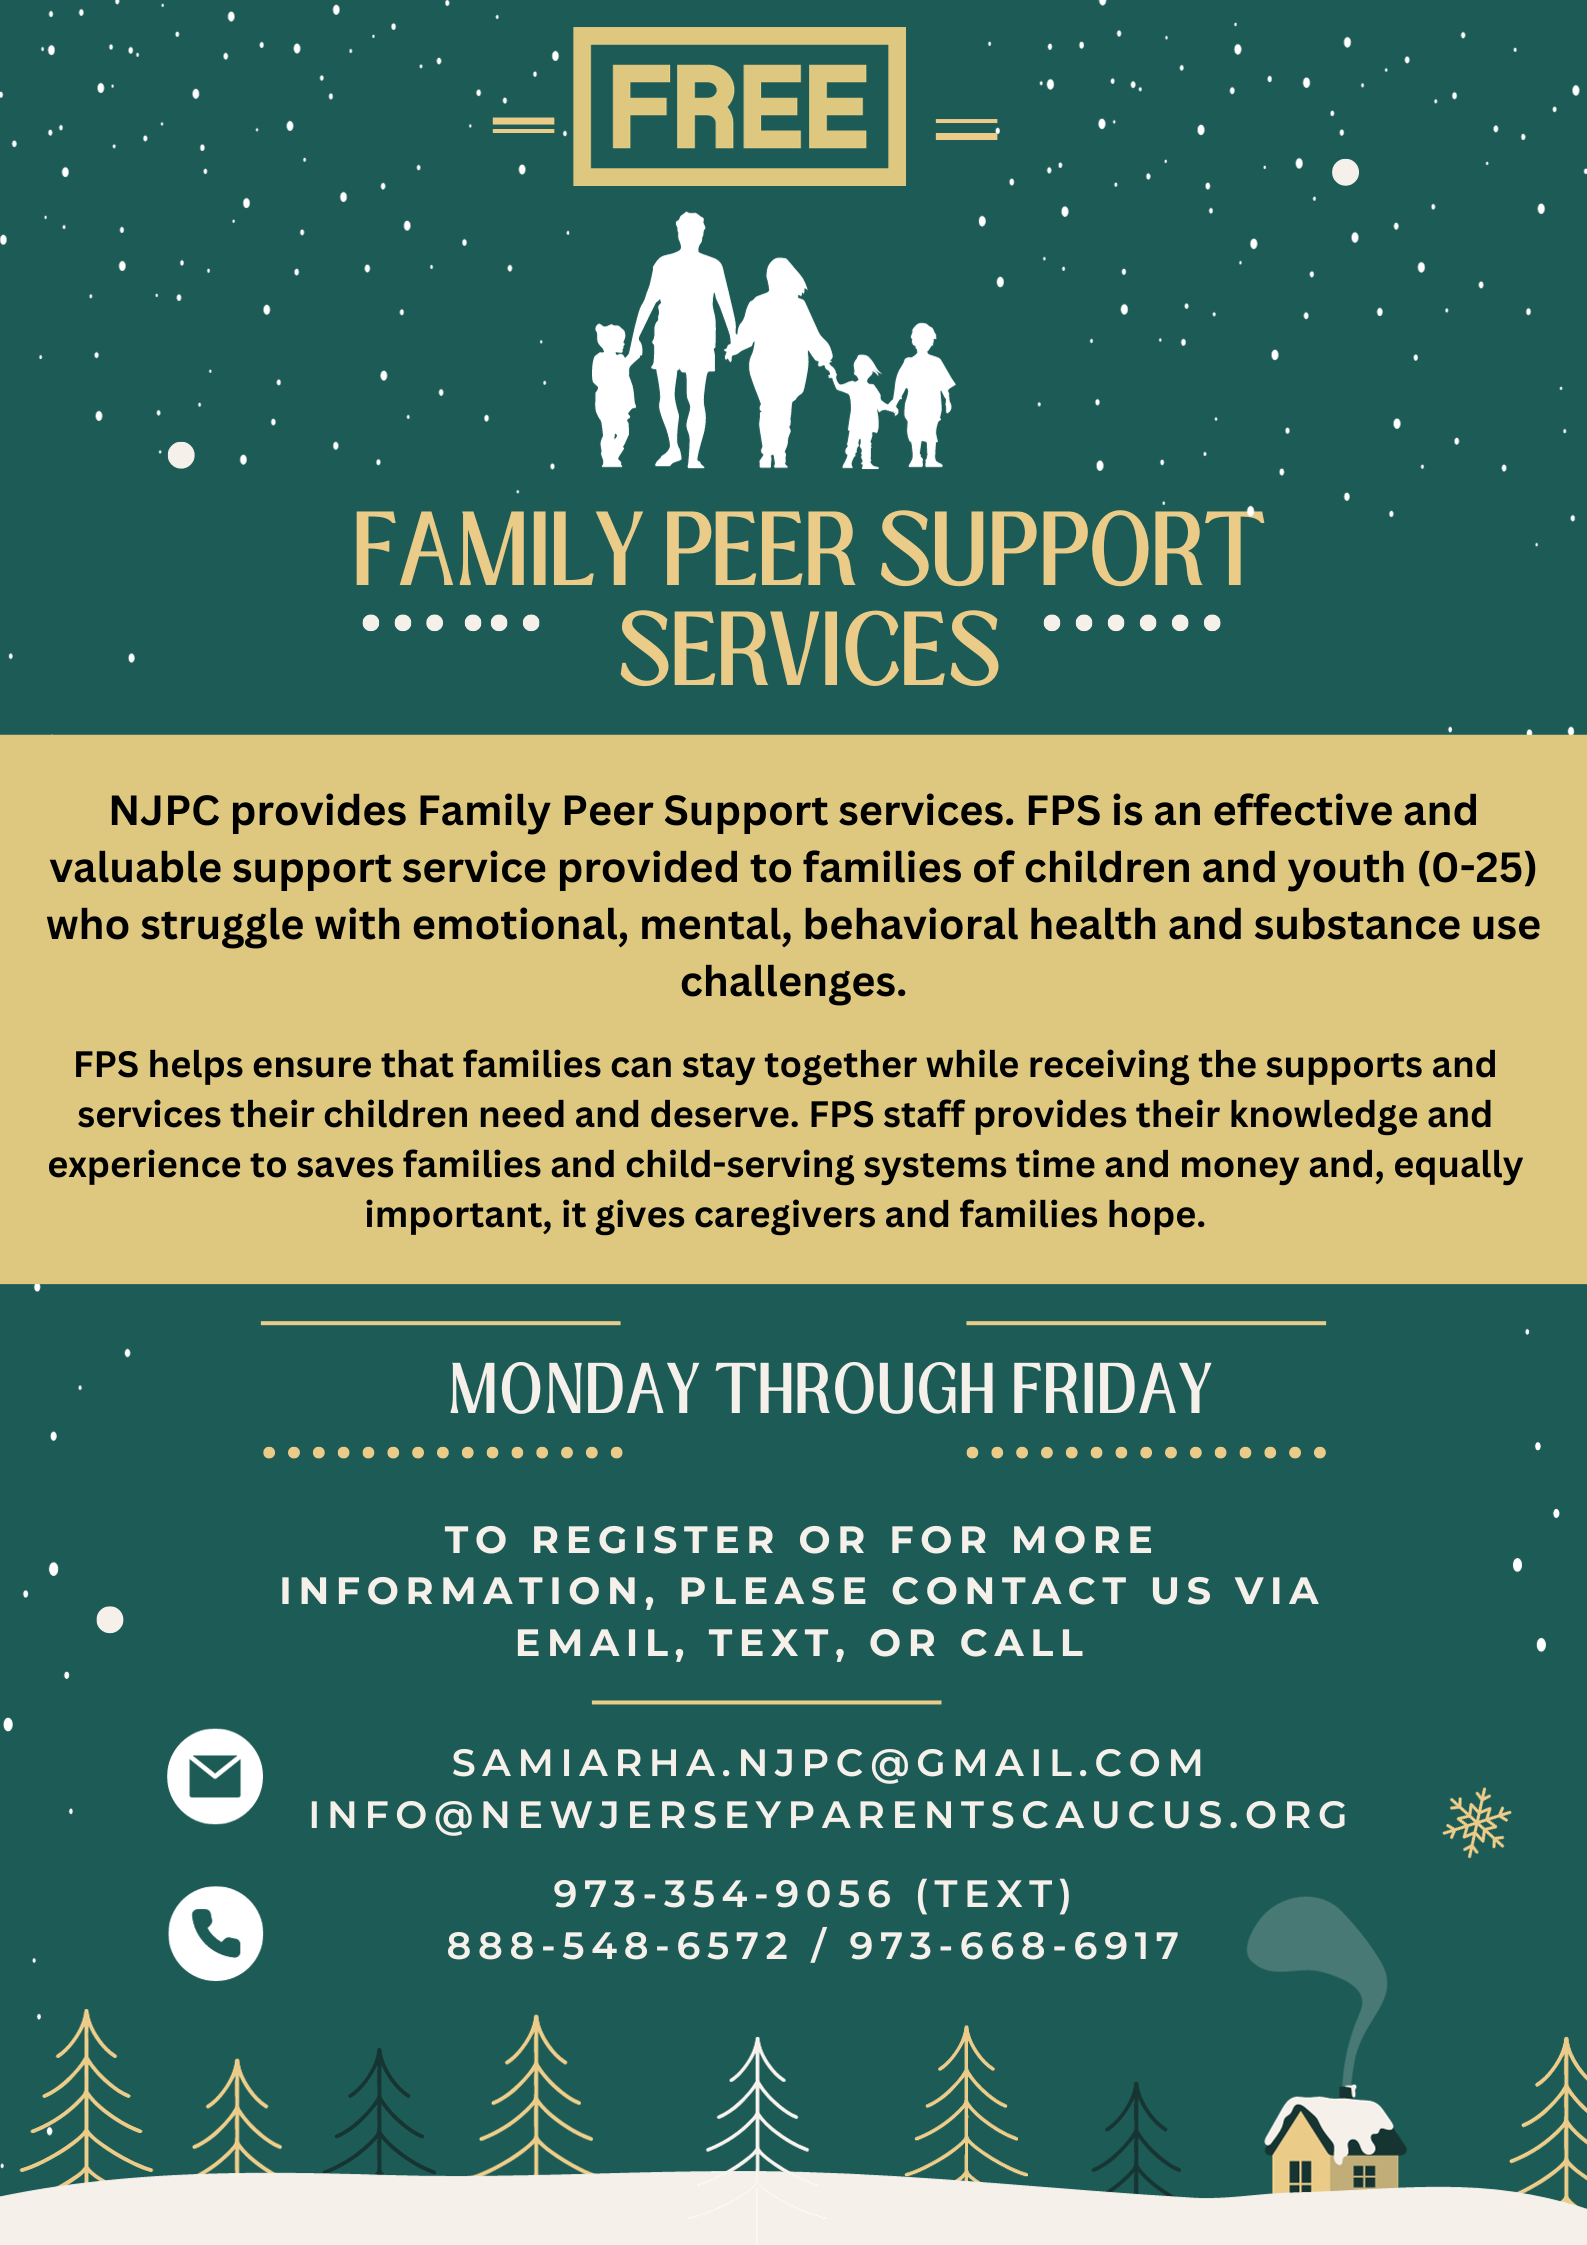 FAMILY PEER SUPPORT SERVICES (1)